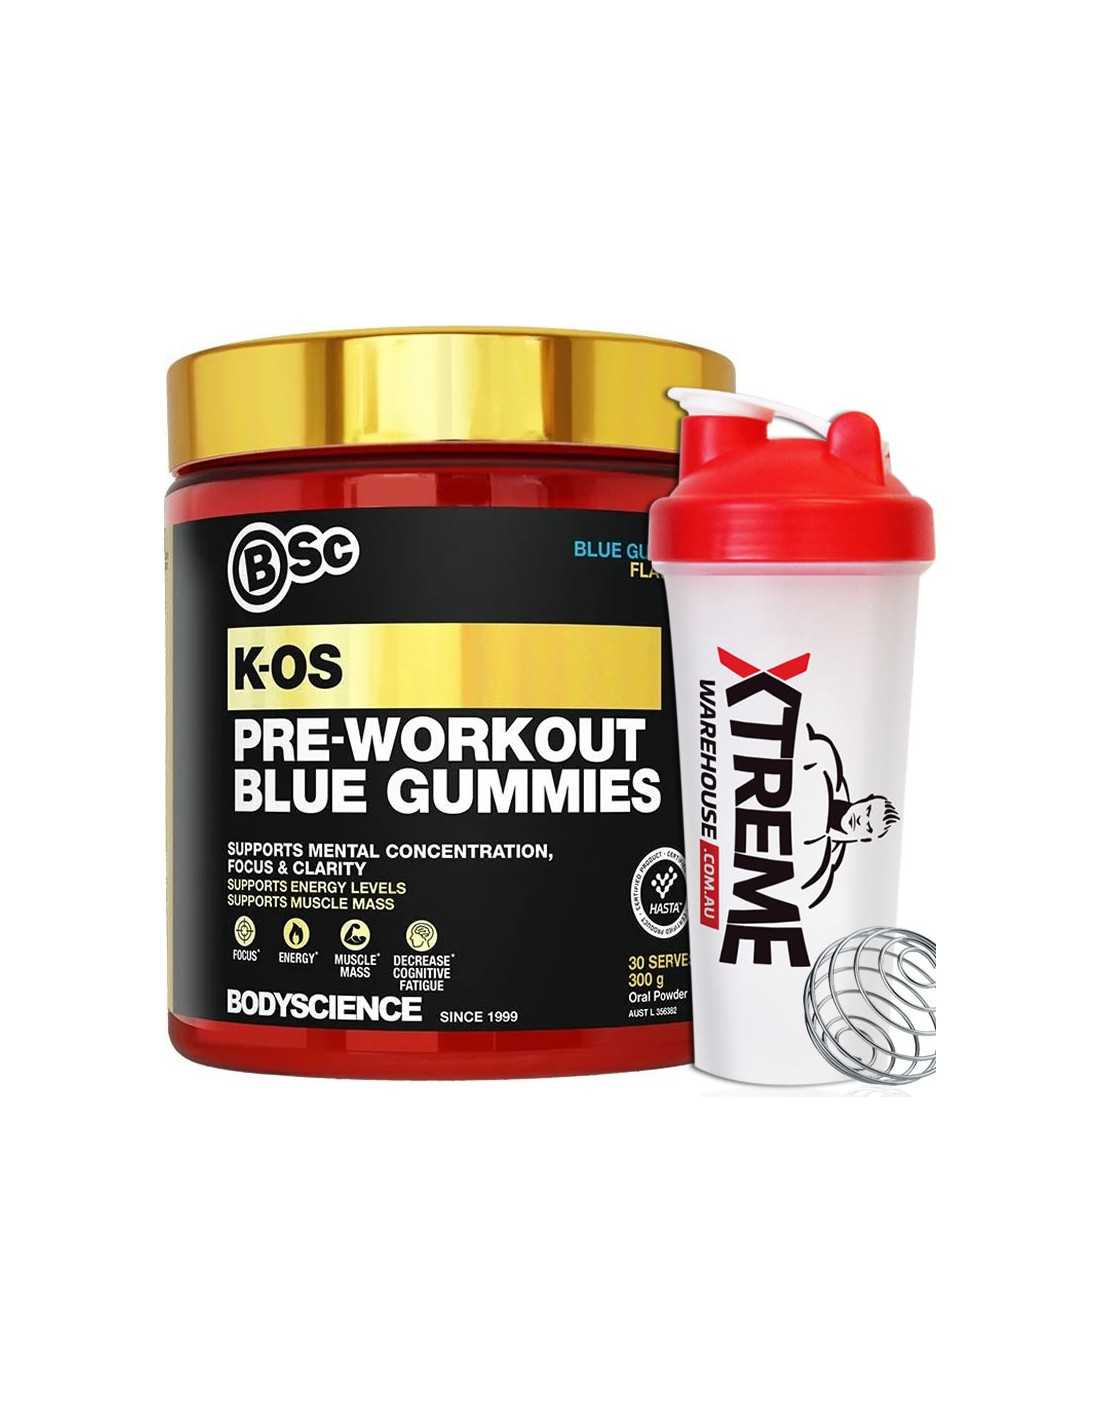 10 Minute Bsc pre workout for Build Muscle